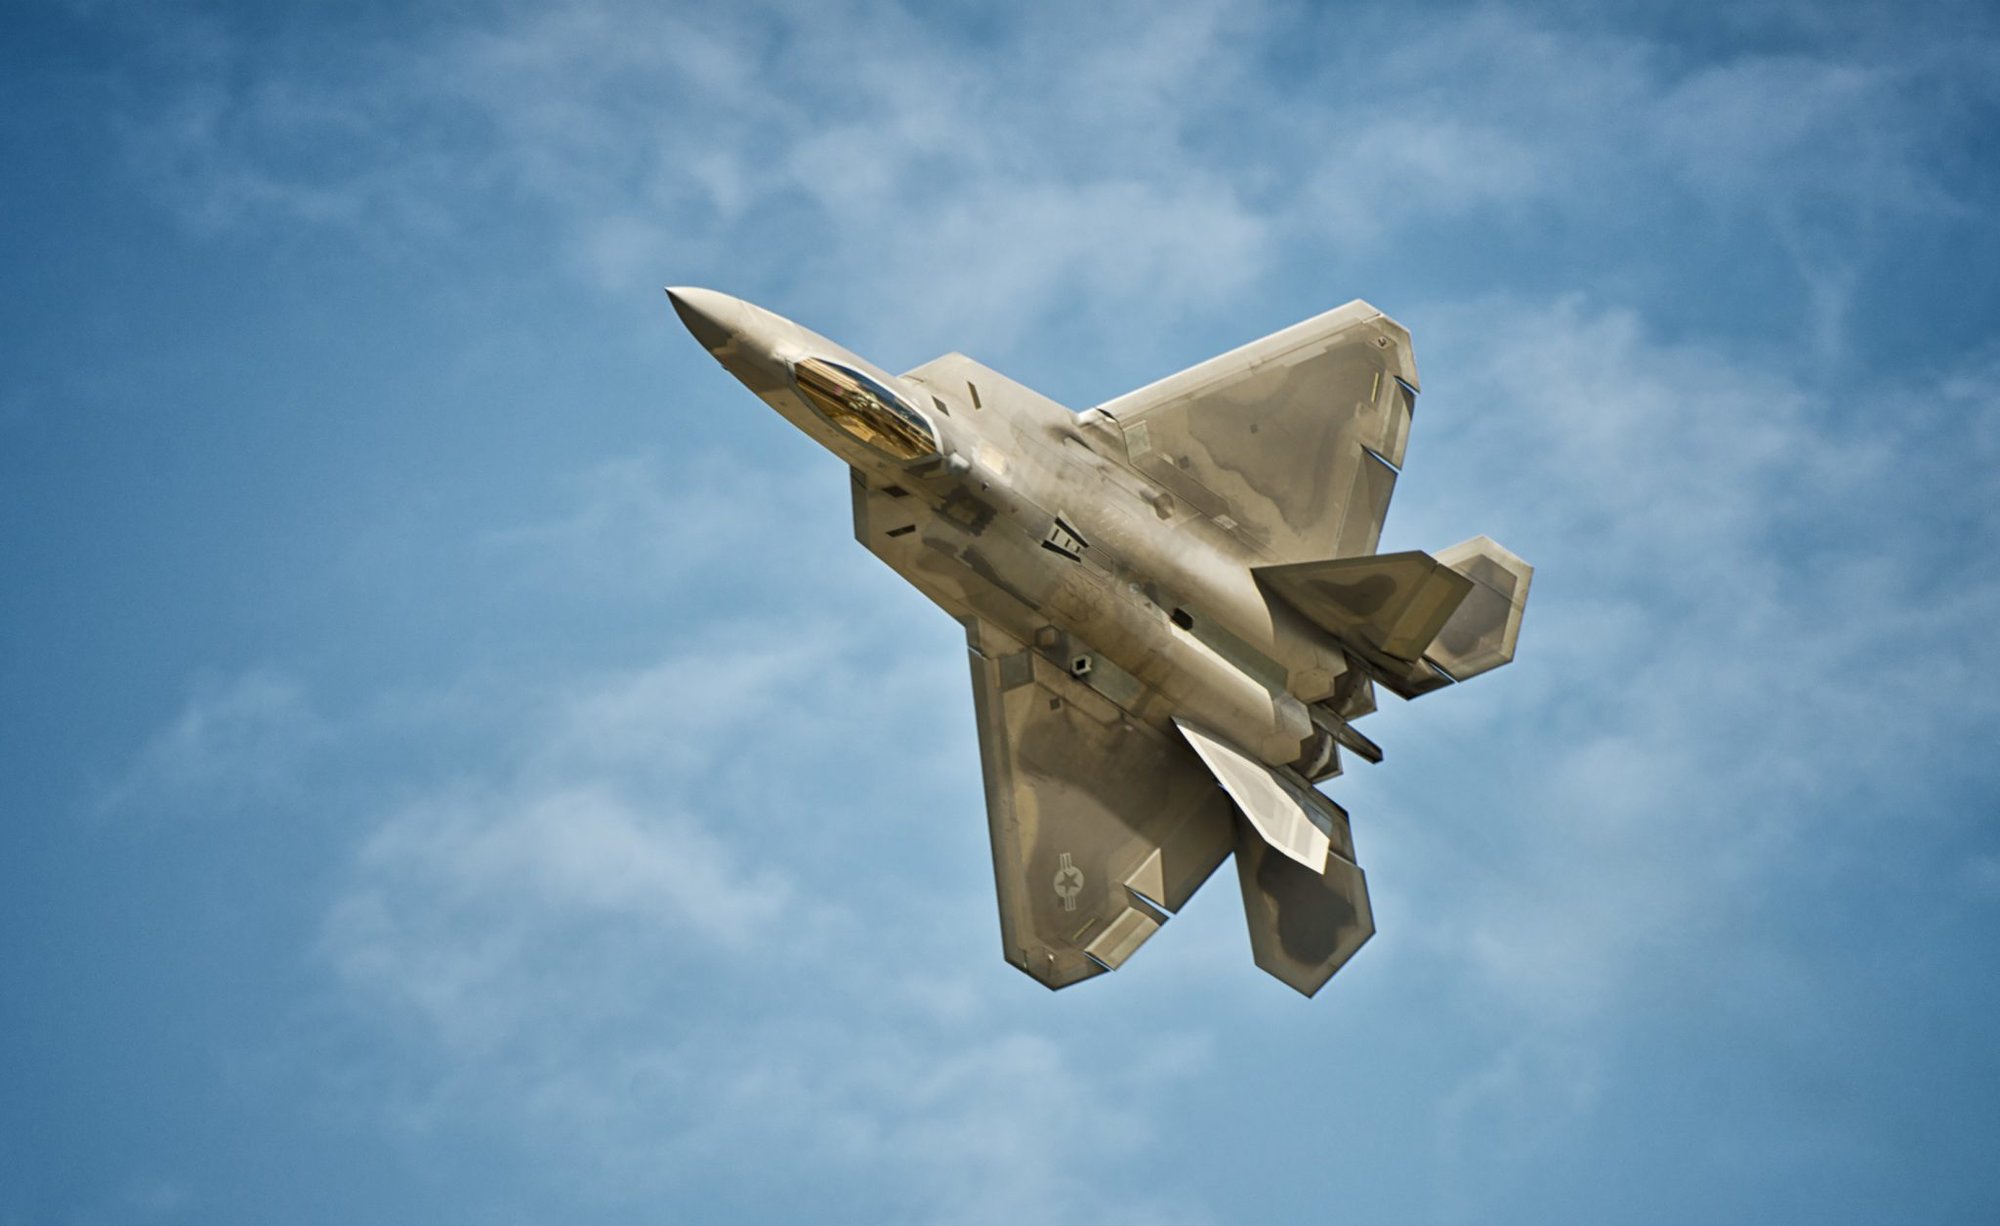 An F-22 Raptor demonstrates its warfighting capabilities during an F-22 demonstration at the biennial Arctic Thunder Open House on Joint Base Elmendorf-Richardson, Alaska, July 26, 2014. The event features more than 40 Air Force, Army and civilian aerial acts, July 25-27, and has an expected crowd of more than 200,000 people. It is the largest two-day event in the state and one of the premier aerial demonstrations in the world. The 2014 Arctic Thunder Open House is a proud part of the Anchorage Centennial Celebration.